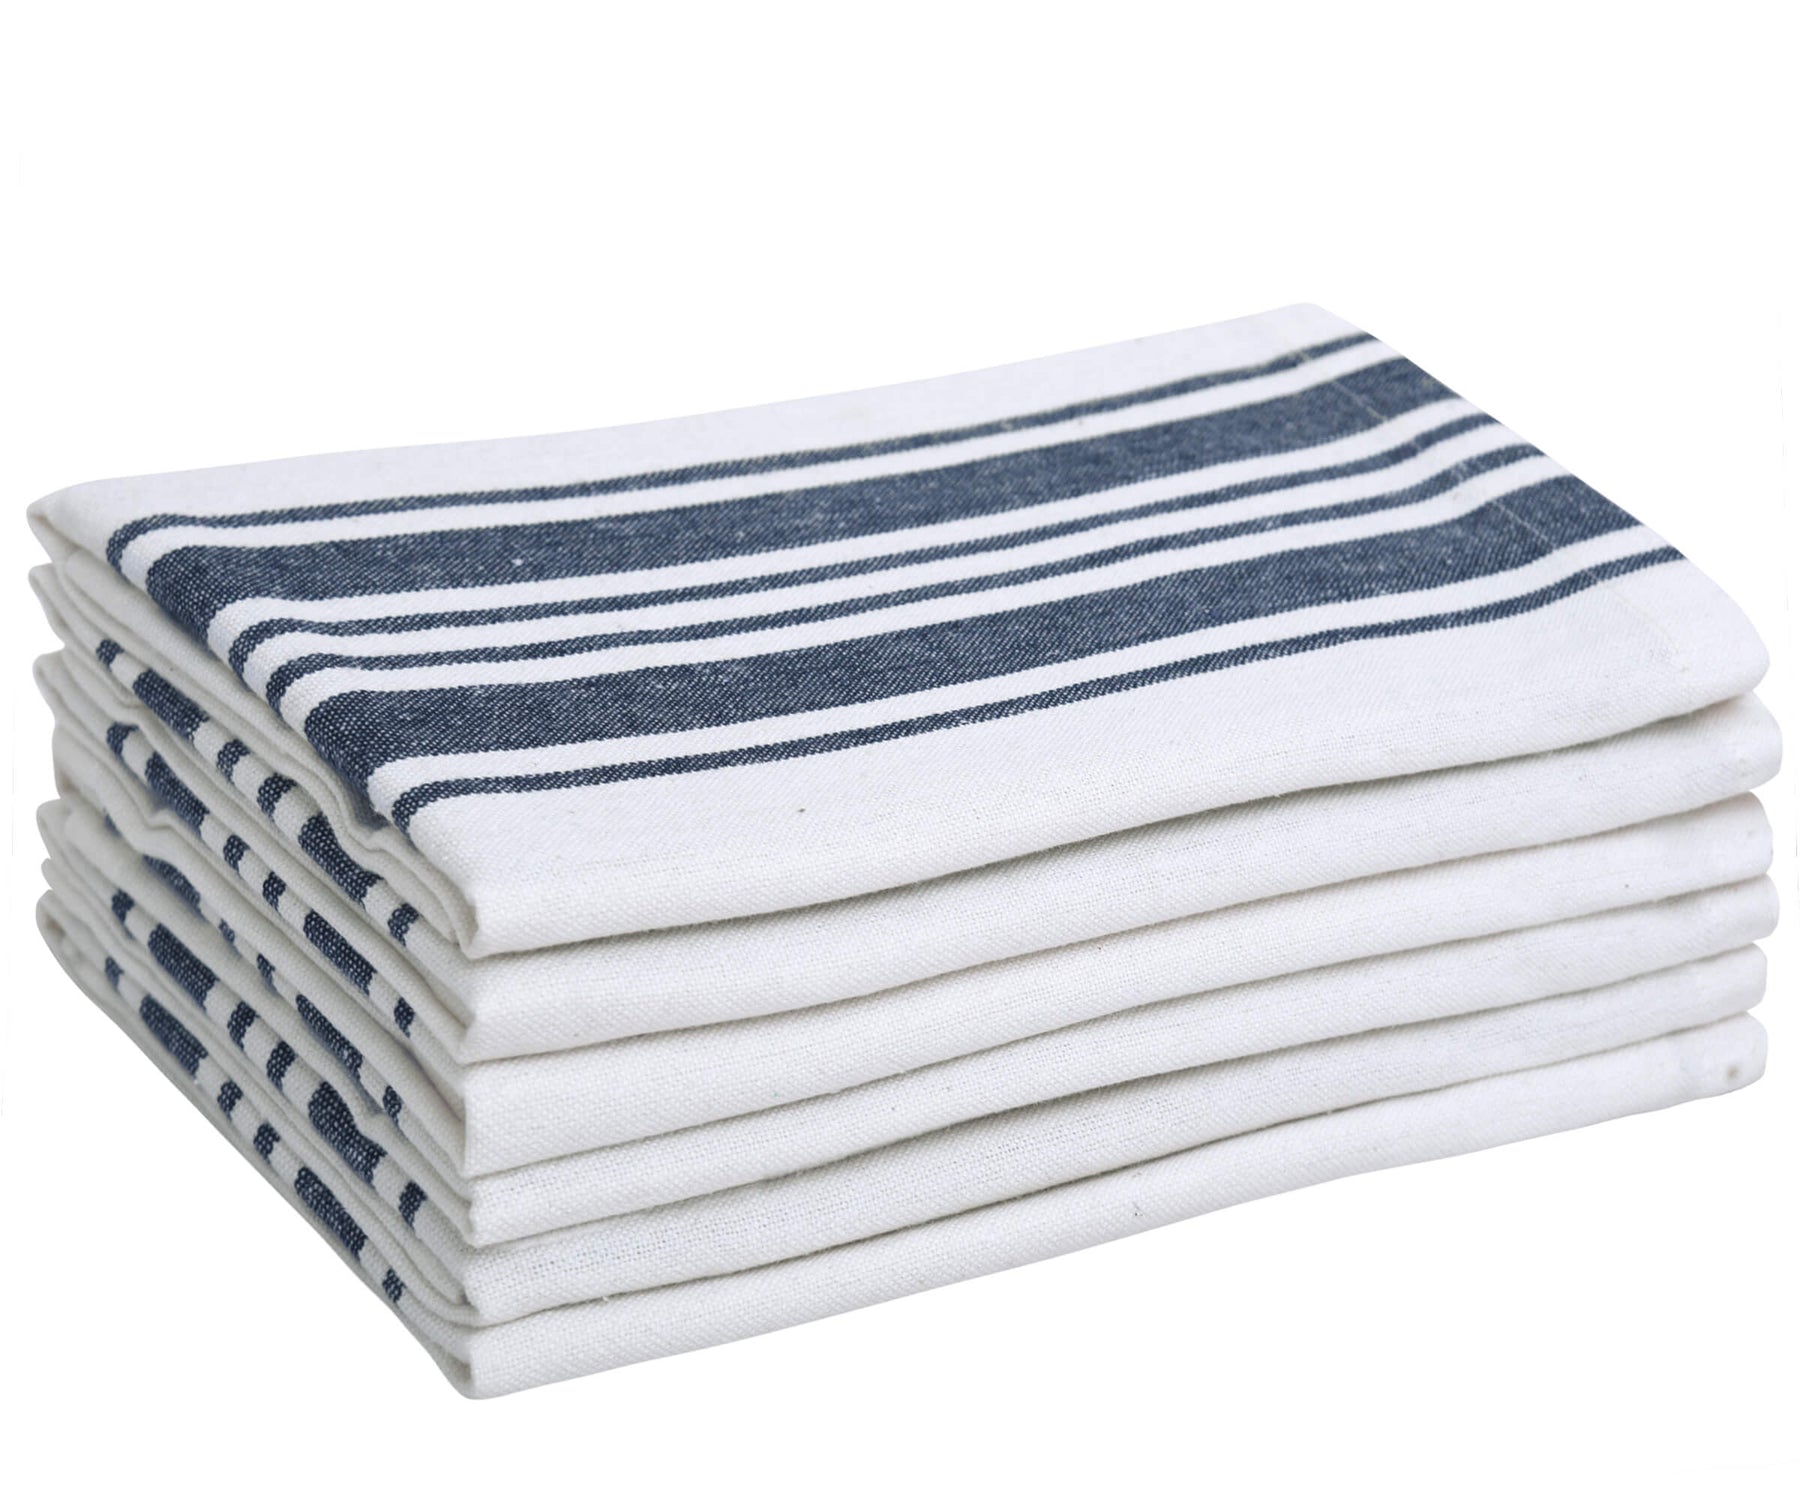 Blue napkins cloth - Cotton napkins are Folded & Set of 6 Bistro napkins are arranged vertically one above another.